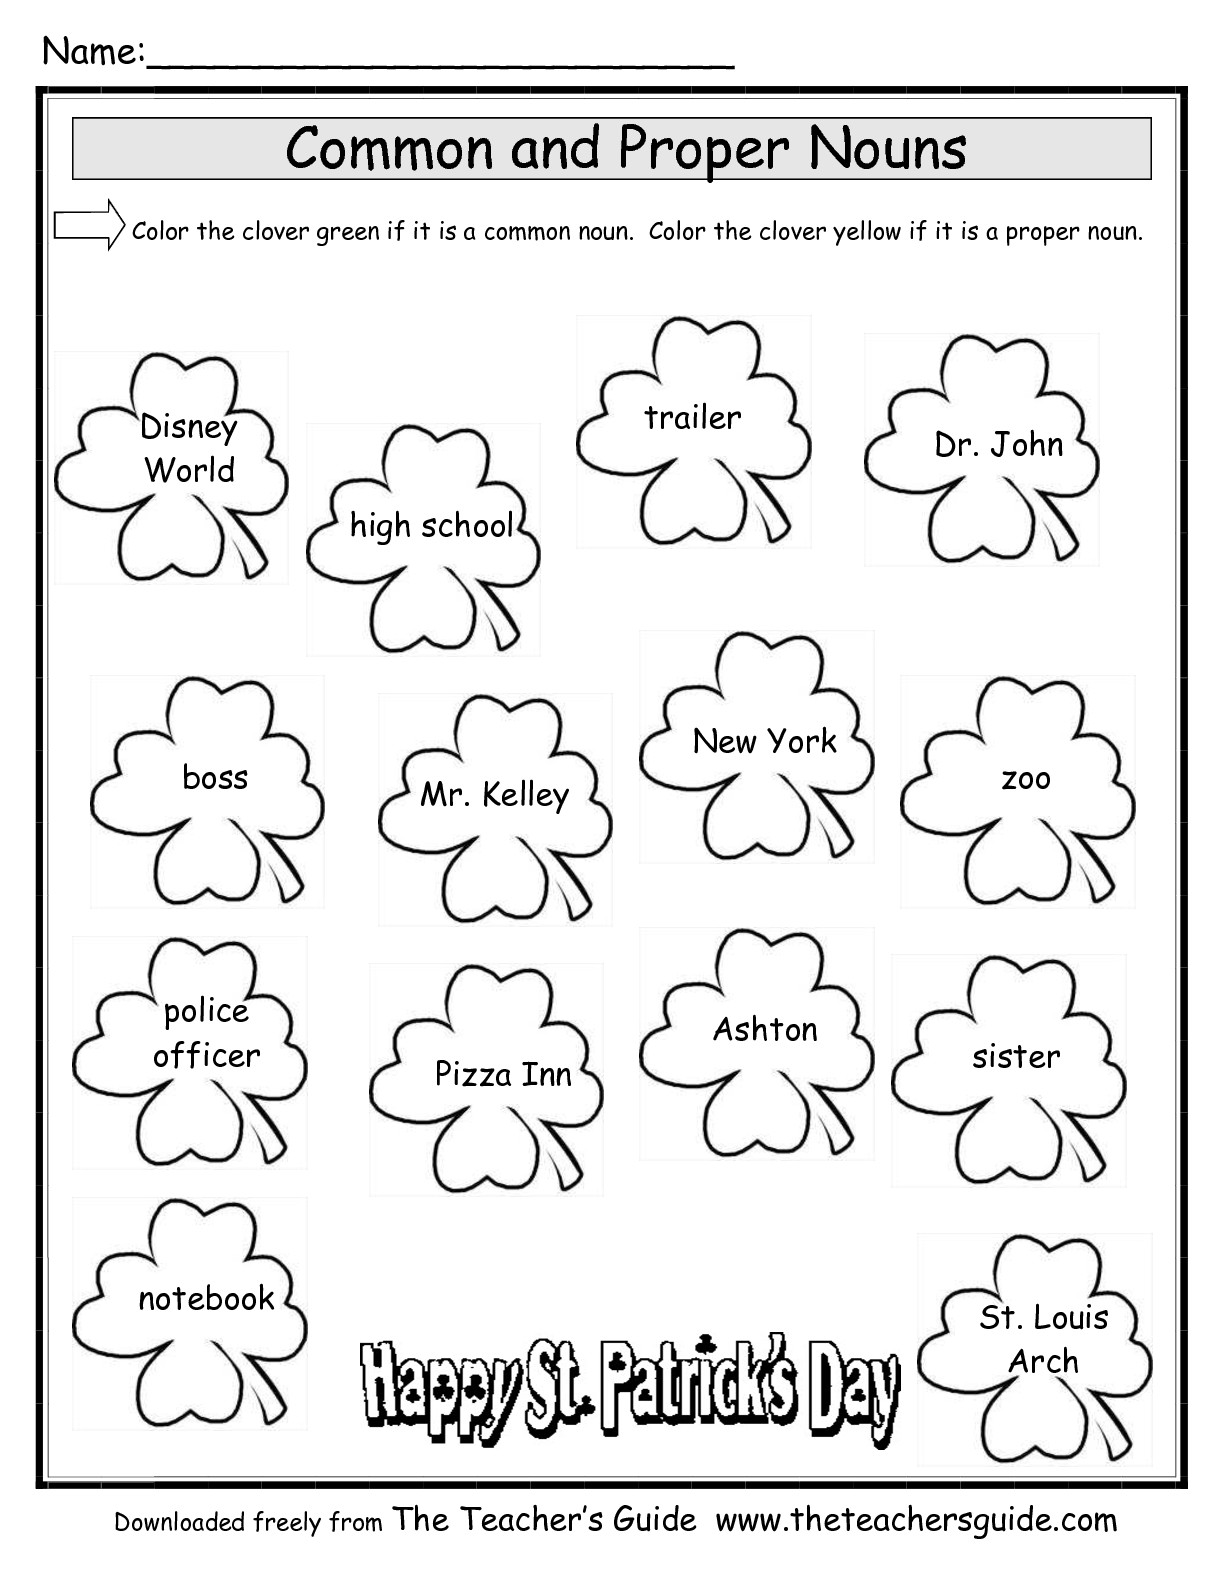 common-and-proper-nouns-worksheet